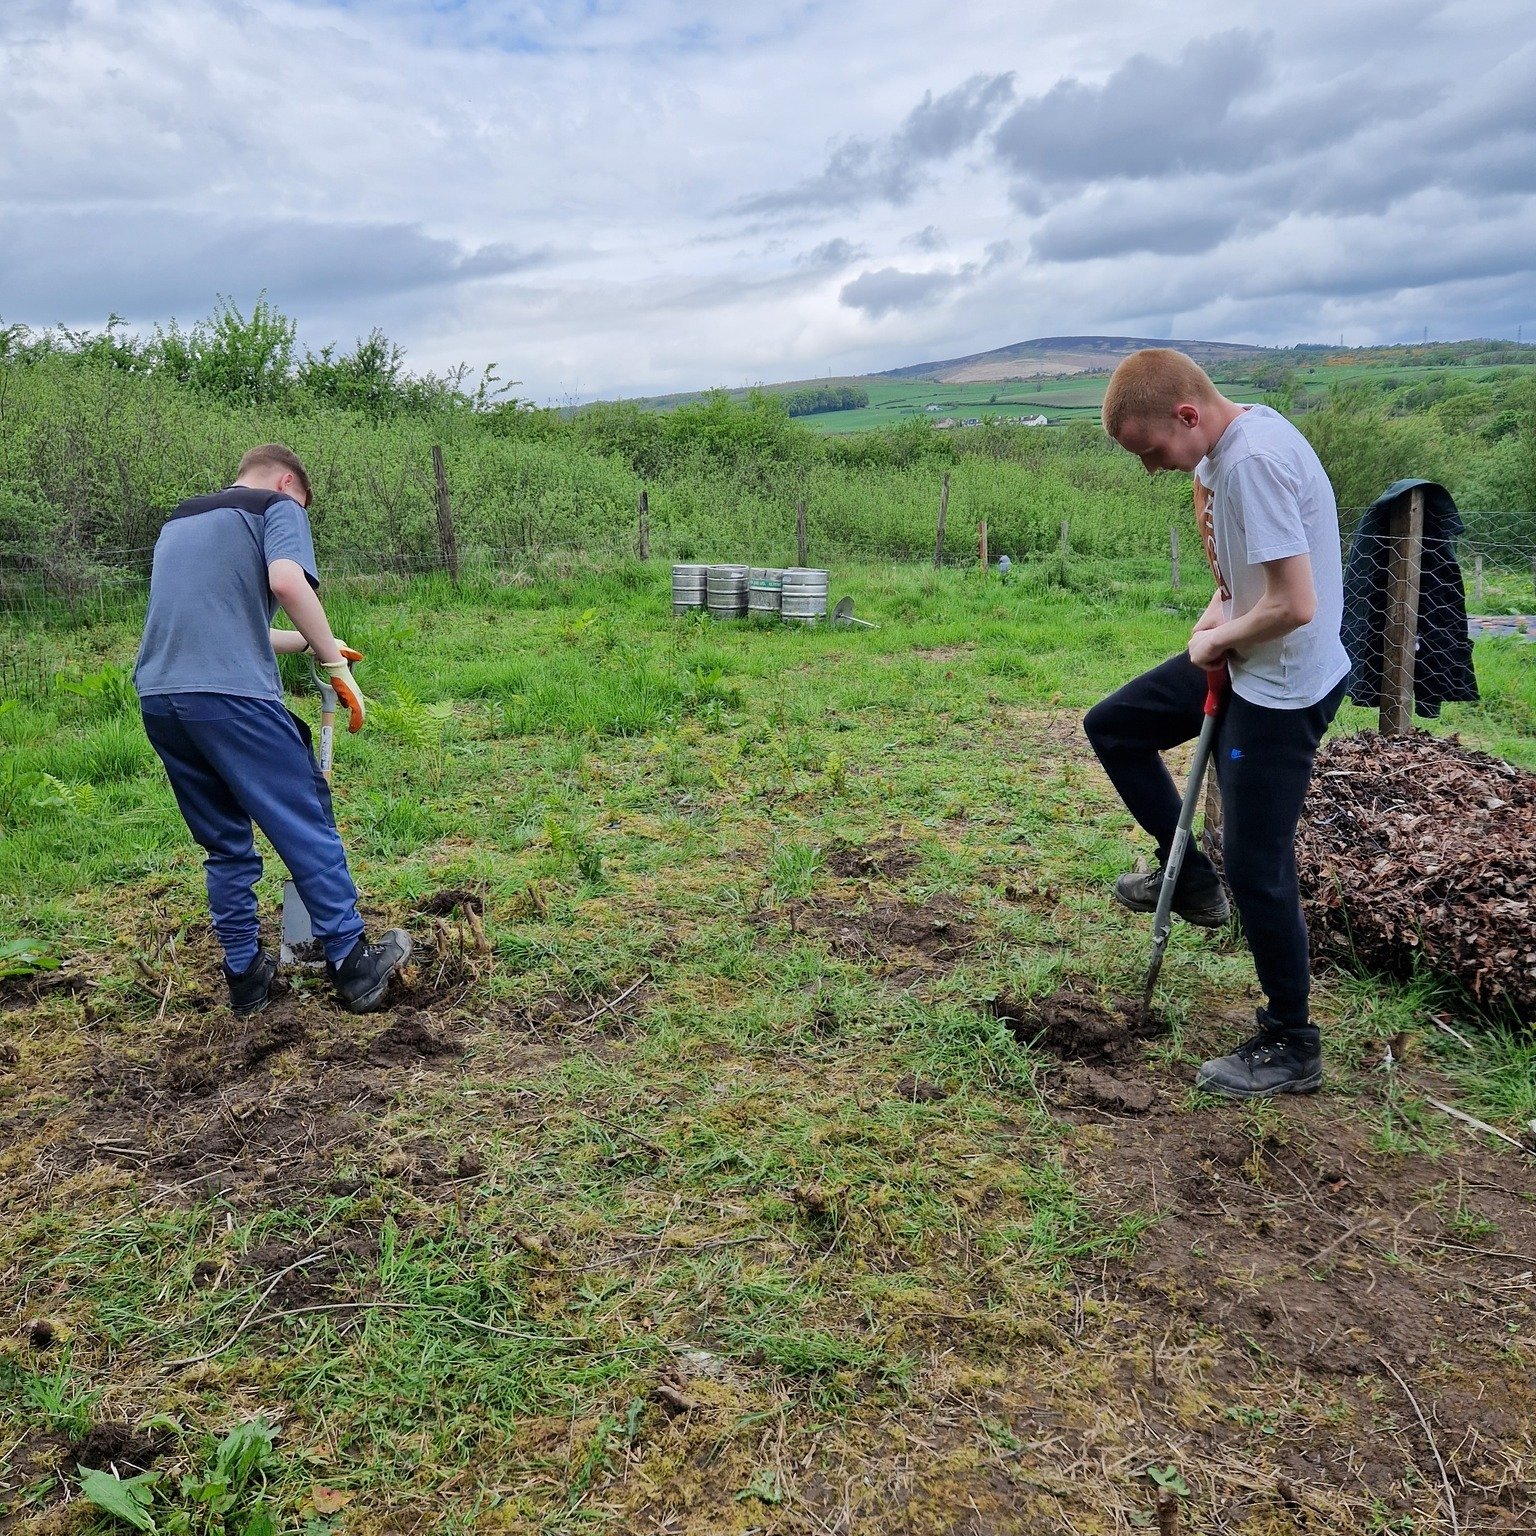 Last week, our gardening group were up at Knowetop helping lay down cardboard and wood chip which is the base for a 'no dig' potato planting area.

The young people also were tasked with making the environment safer by helping to remove tree stumps w